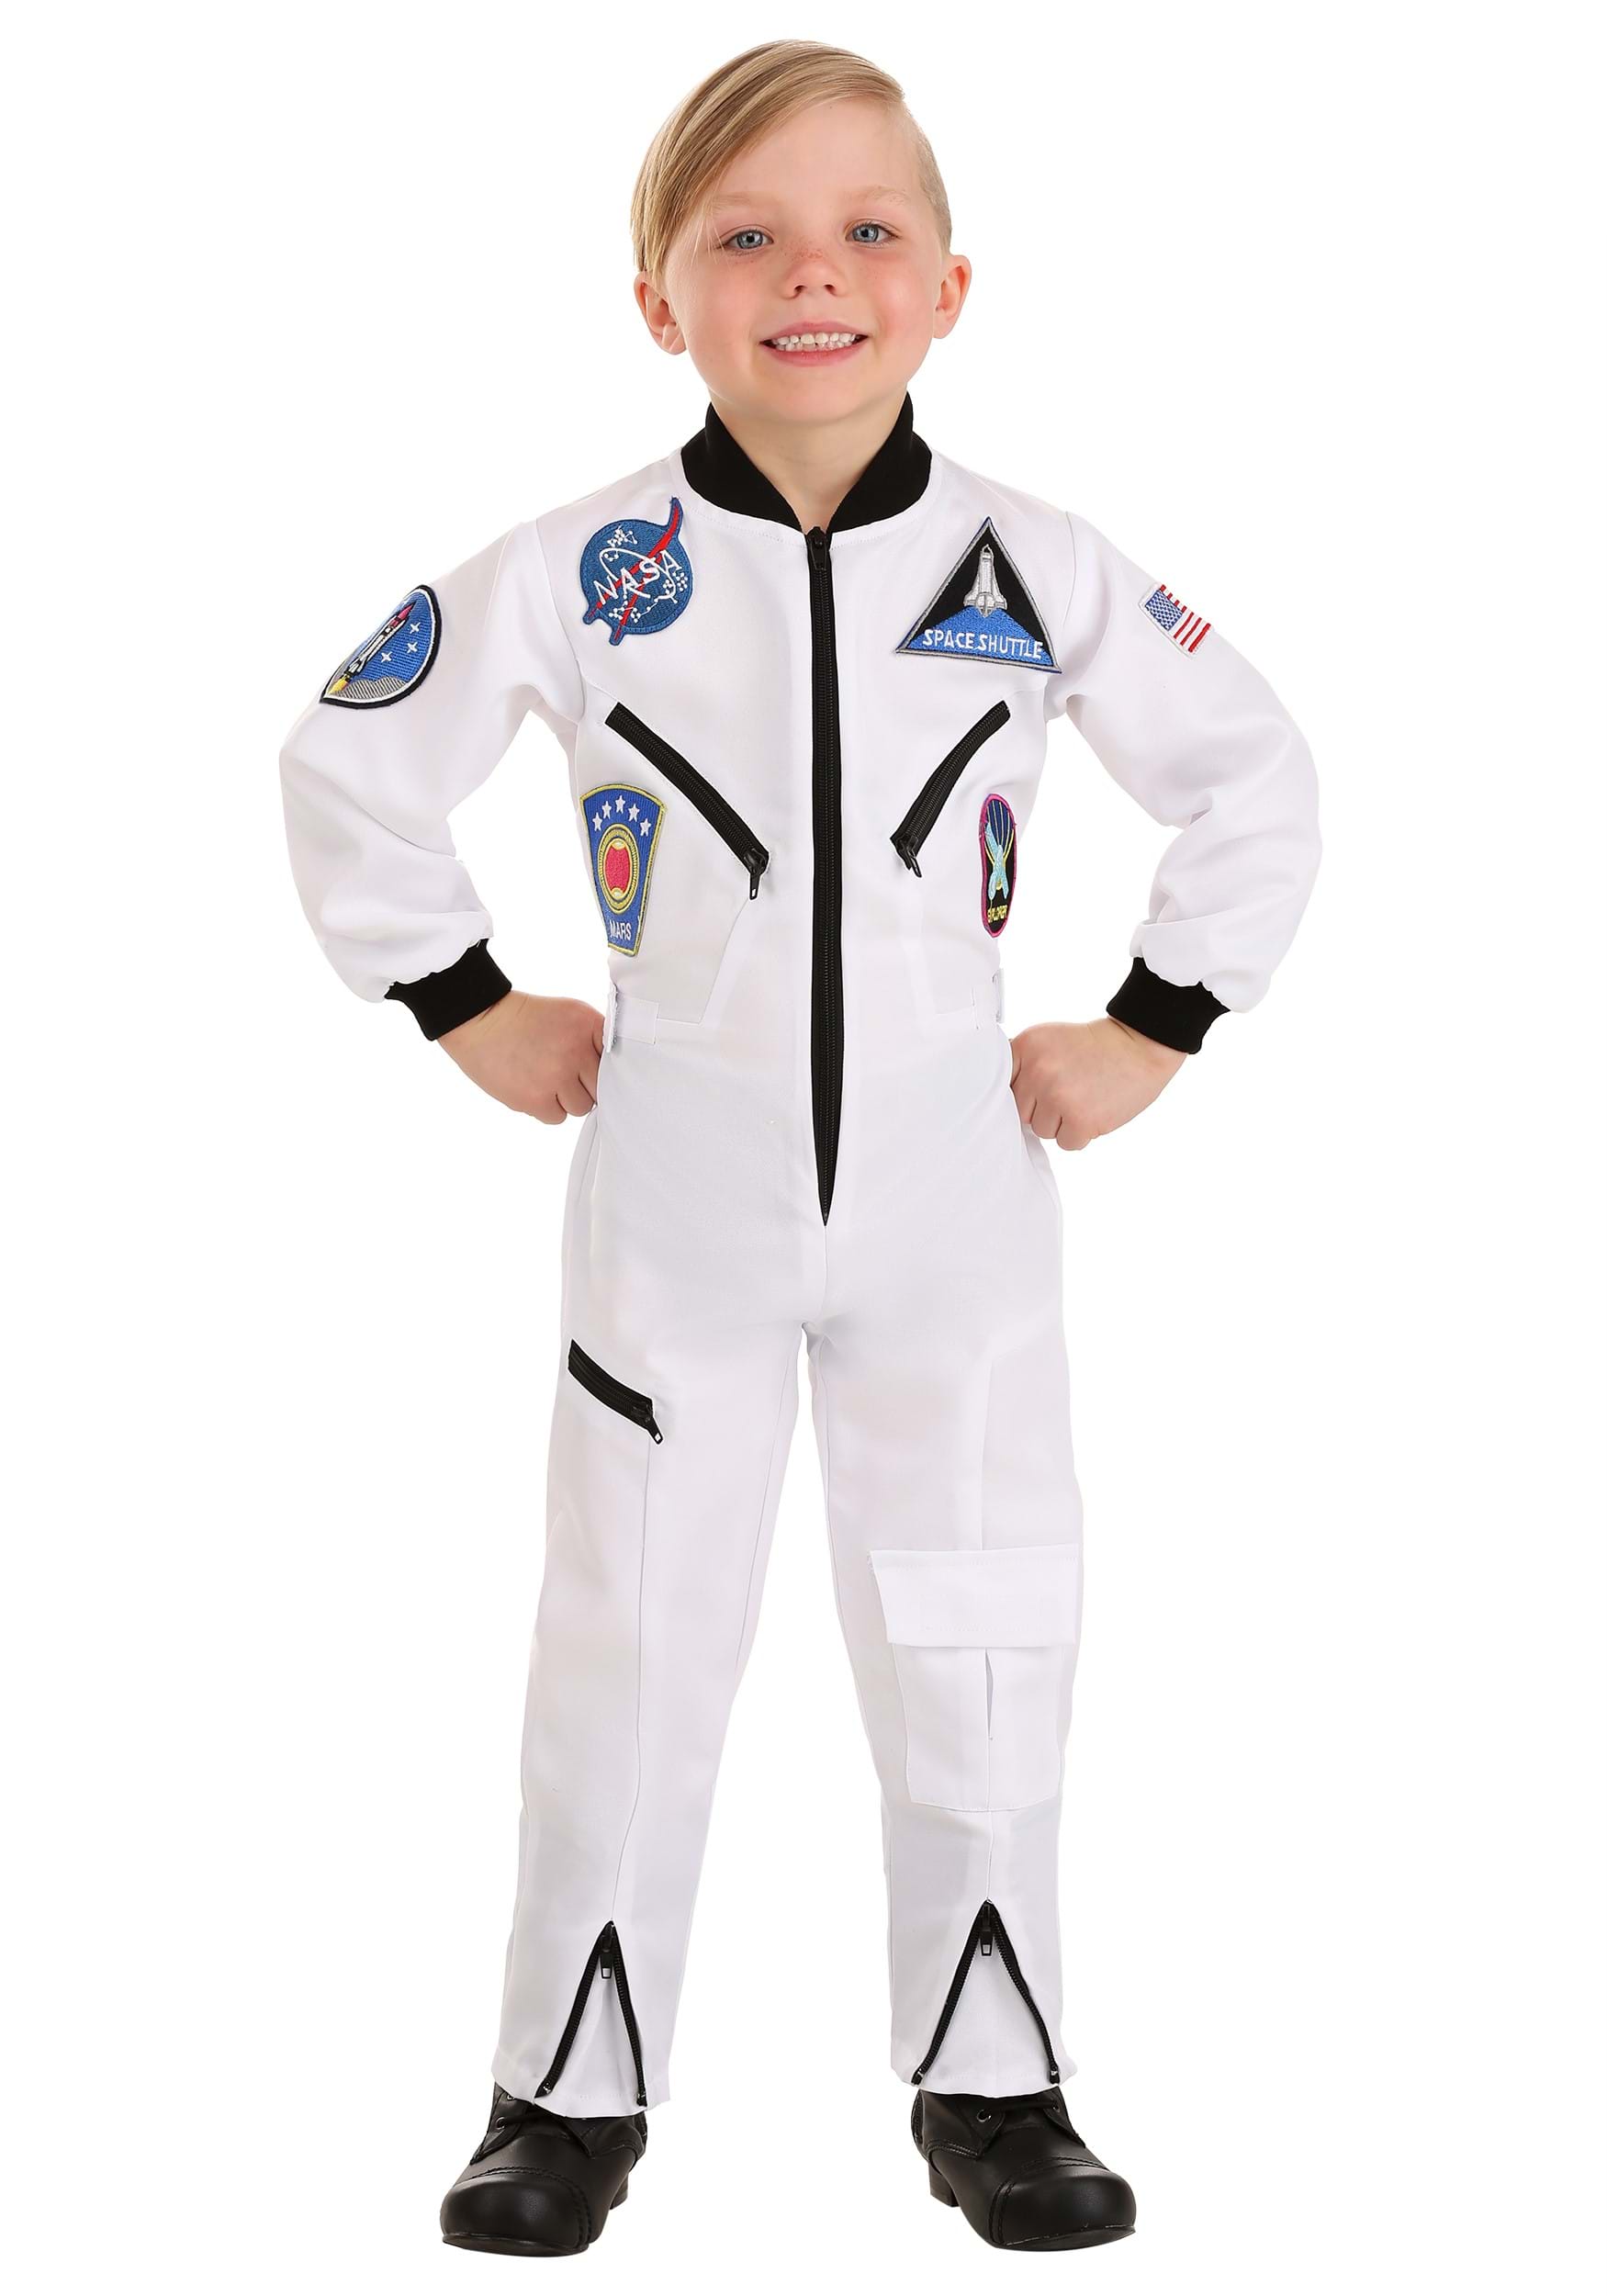 Photos - Fancy Dress Toddler FUN Costumes White Astronaut Jumpsuit  Costume Blue/Red/Whi 